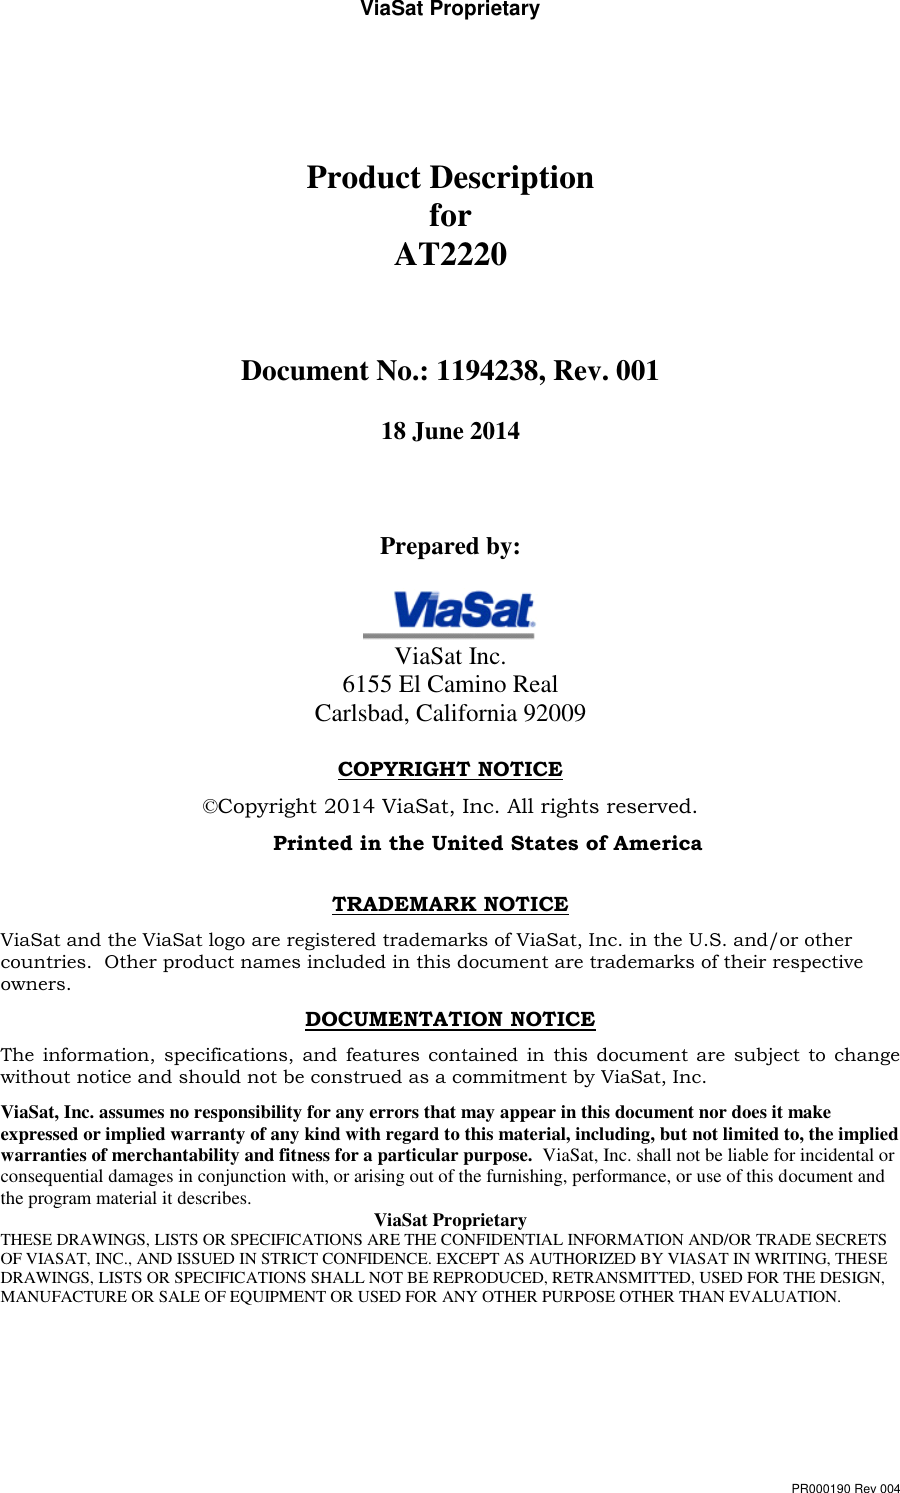 ViaSat Proprietary PR000190 Rev 004   Product Description for AT2220   Document No.: 1194238, Rev. 001  18 June 2014    Prepared by:   ViaSat Inc. 6155 El Camino Real Carlsbad, California 92009  COPYRIGHT NOTICE   ©Copyright 2014 ViaSat, Inc. All rights reserved.   Printed in the United States of America  TRADEMARK NOTICE ViaSat and the ViaSat logo are registered trademarks of ViaSat, Inc. in the U.S. and/or other countries.  Other product names included in this document are trademarks of their respective owners. DOCUMENTATION NOTICE The  information,  specifications,  and  features  contained in this document are subject  to change without notice and should not be construed as a commitment by ViaSat, Inc. ViaSat, Inc. assumes no responsibility for any errors that may appear in this document nor does it make expressed or implied warranty of any kind with regard to this material, including, but not limited to, the implied warranties of merchantability and fitness for a particular purpose.  ViaSat, Inc. shall not be liable for incidental or consequential damages in conjunction with, or arising out of the furnishing, performance, or use of this document and the program material it describes.  ViaSat Proprietary THESE DRAWINGS, LISTS OR SPECIFICATIONS ARE THE CONFIDENTIAL INFORMATION AND/OR TRADE SECRETS OF VIASAT, INC., AND ISSUED IN STRICT CONFIDENCE. EXCEPT AS AUTHORIZED BY VIASAT IN WRITING, THESE DRAWINGS, LISTS OR SPECIFICATIONS SHALL NOT BE REPRODUCED, RETRANSMITTED, USED FOR THE DESIGN, MANUFACTURE OR SALE OF EQUIPMENT OR USED FOR ANY OTHER PURPOSE OTHER THAN EVALUATION.    